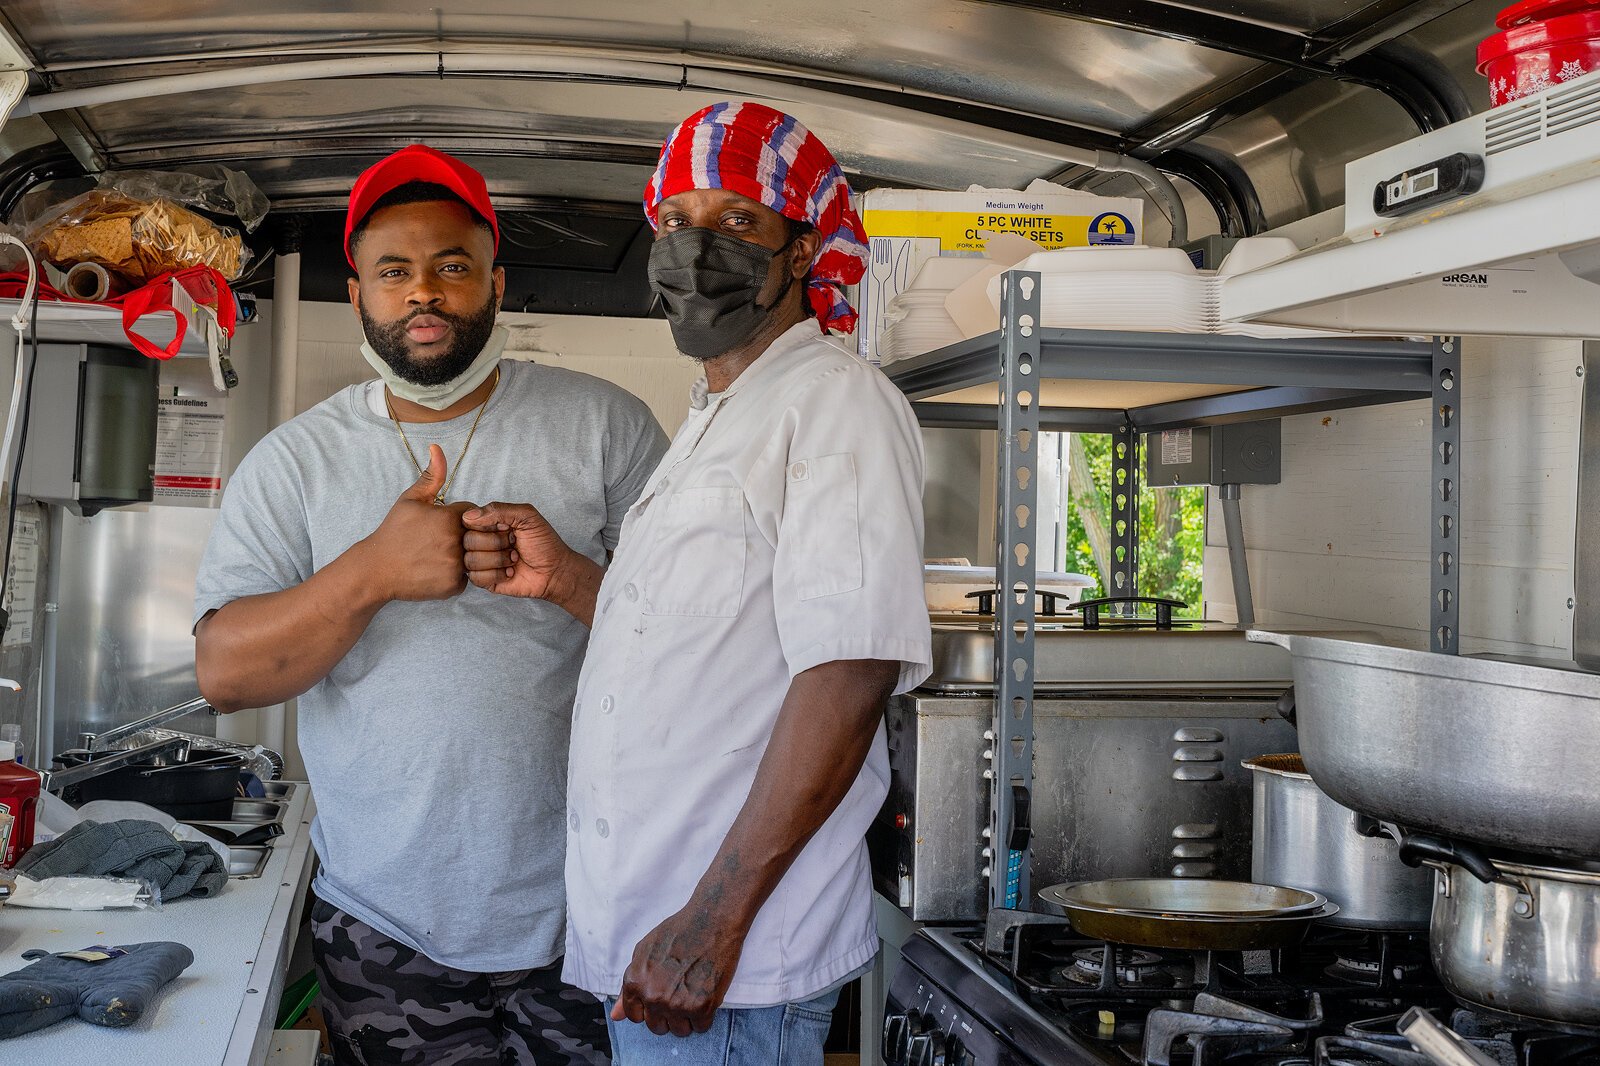 Donandre McNish and Valancio Bailey in the Jamaican Spice food truck.